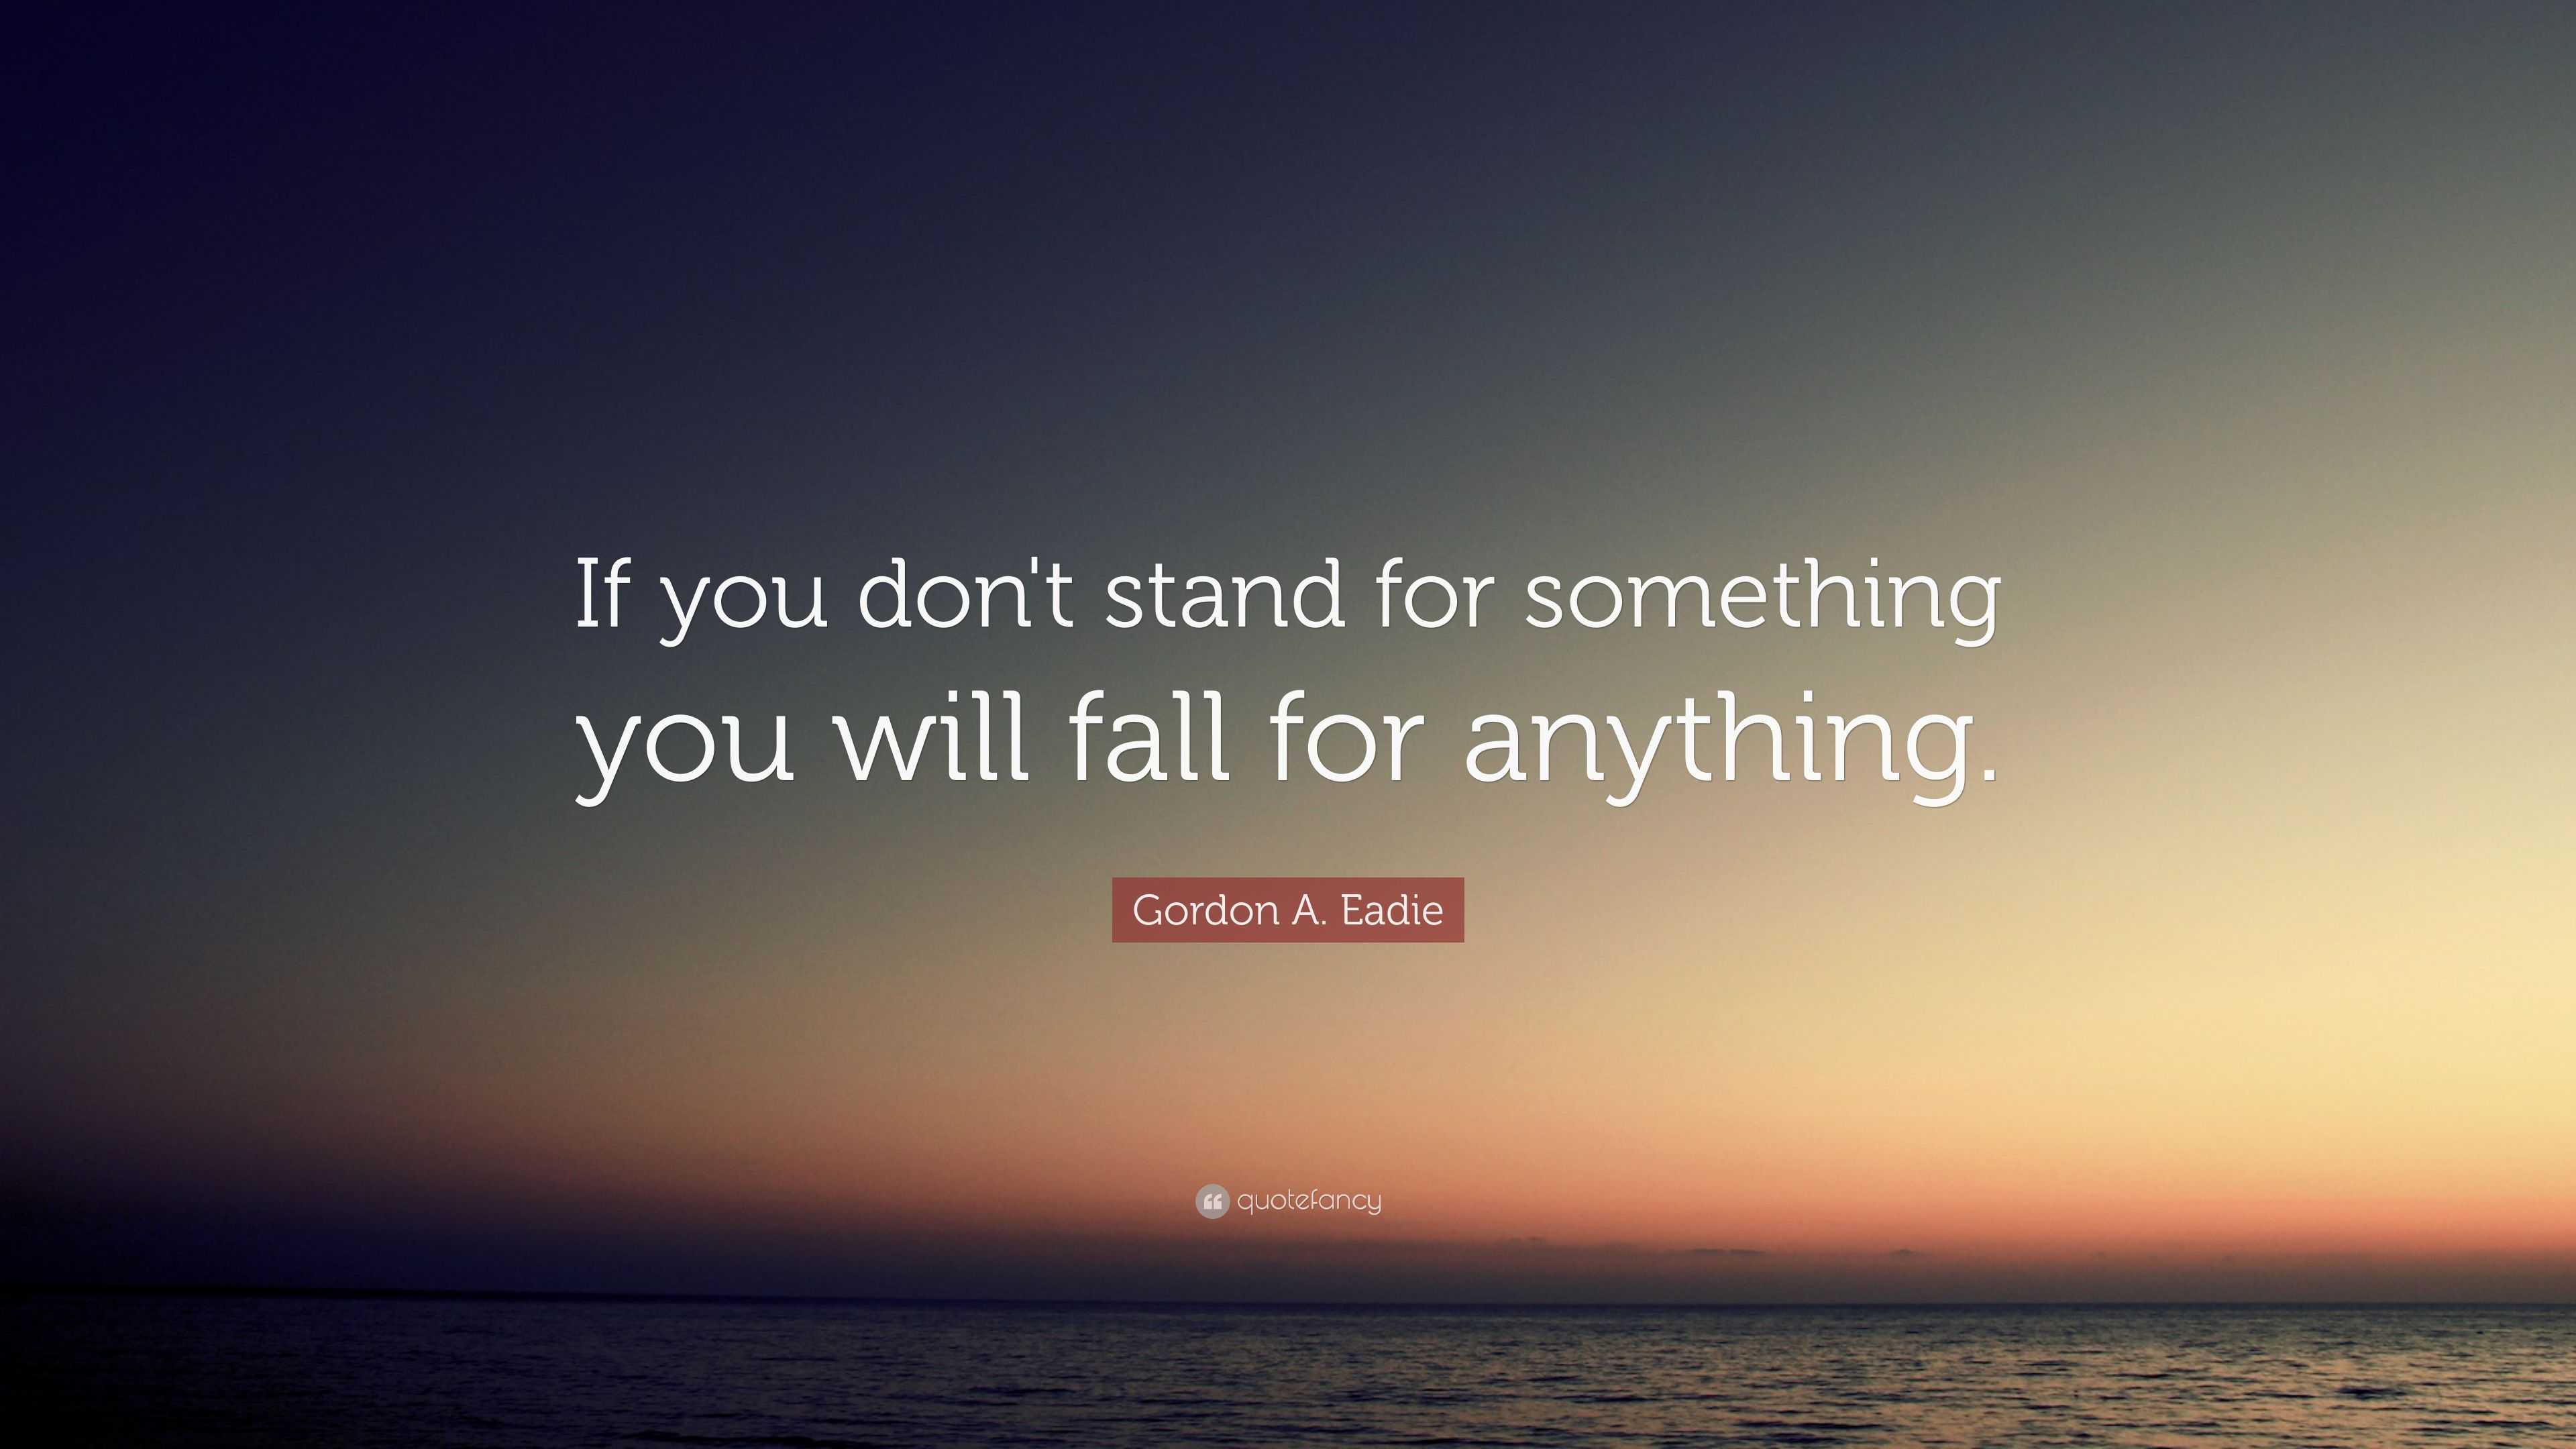 Gordon A. Eadie Quote: “If you don't stand for something you will fall